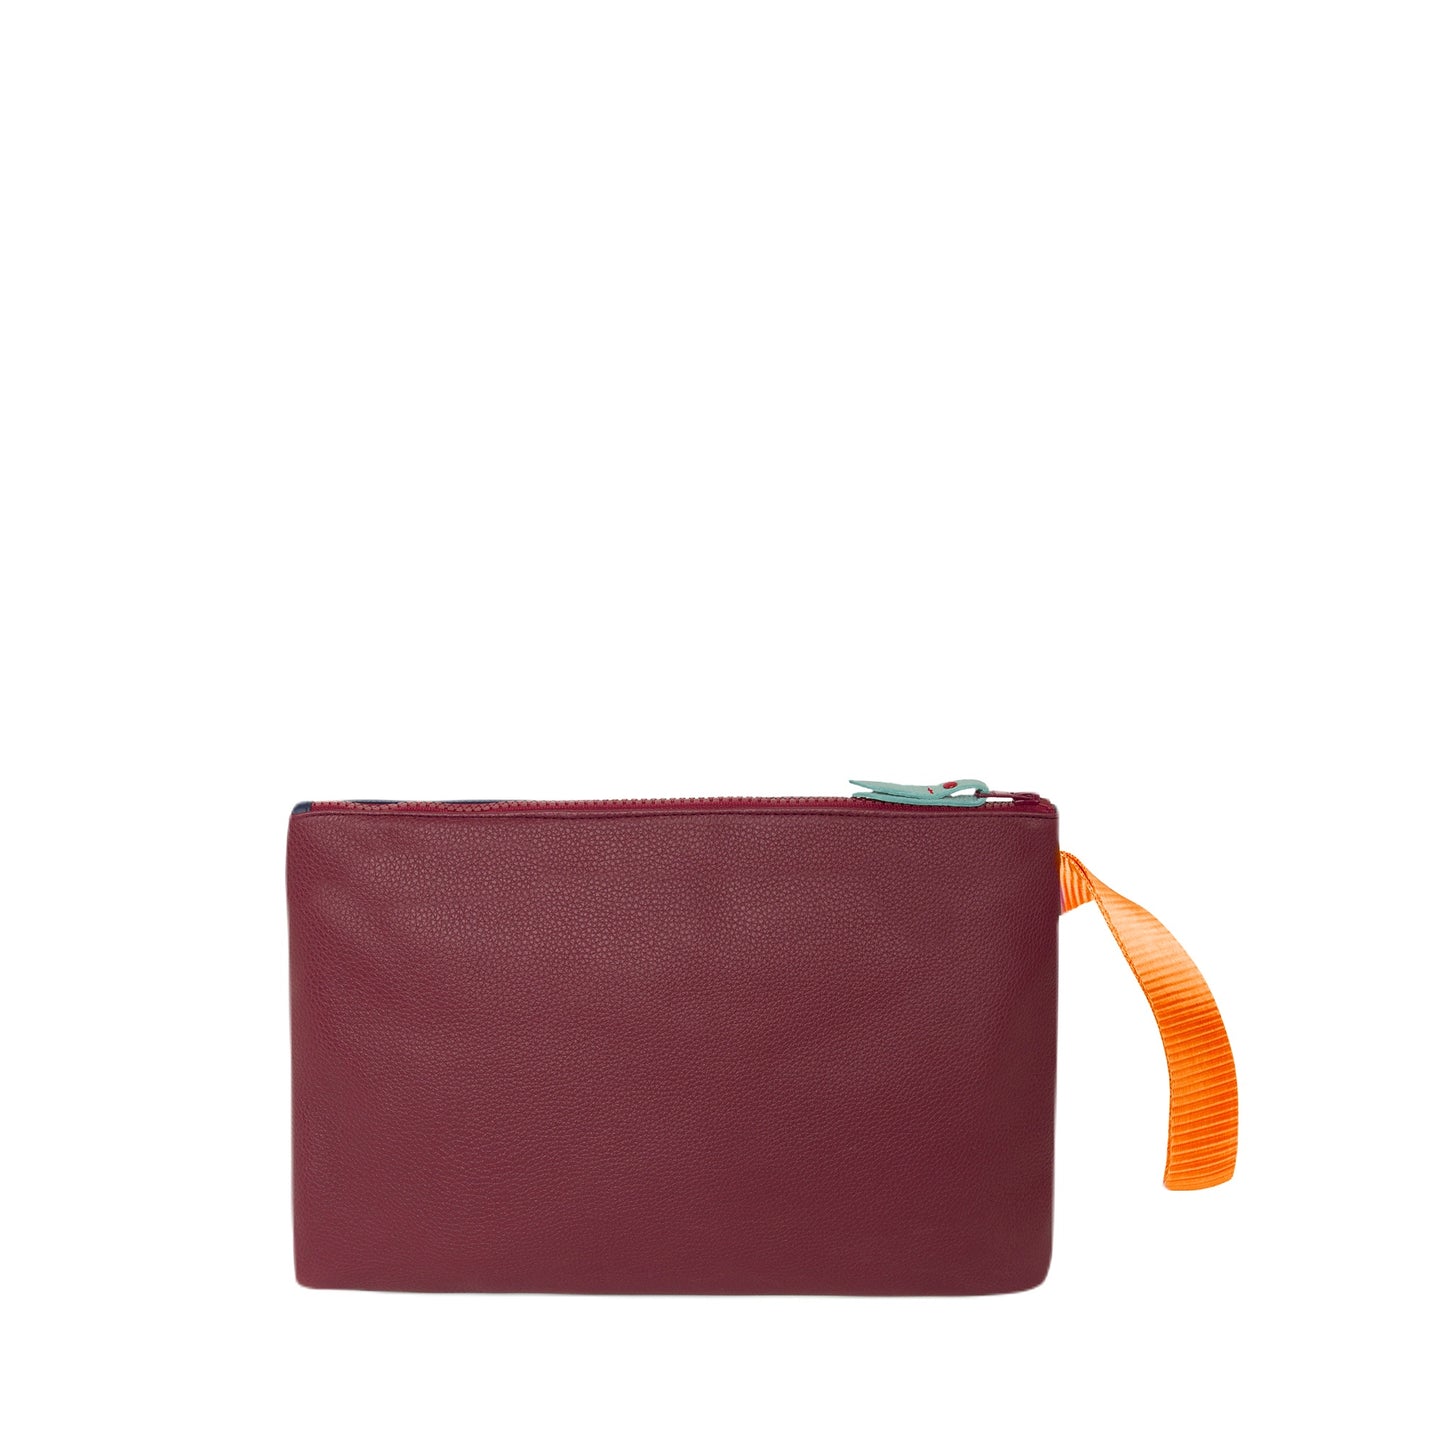 ZIP POUCH Maroon and Blue - M